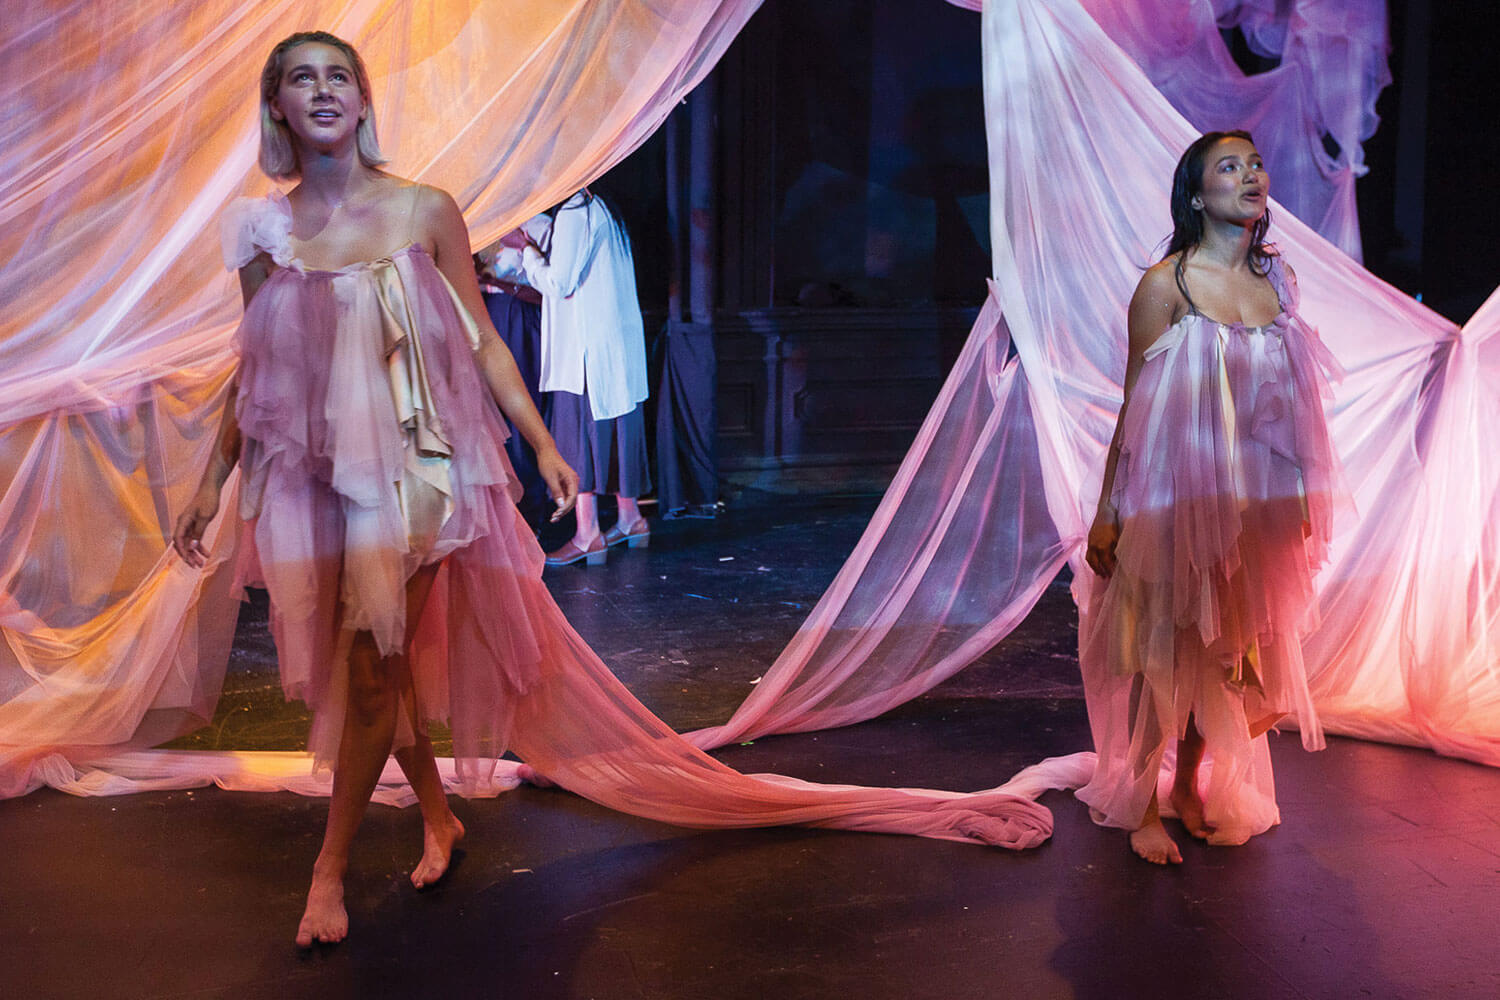 Brooklyn College theater students perform at the 14th Annual Weasel Festival at The Public Theater, a showcase of new work by recent graduates.